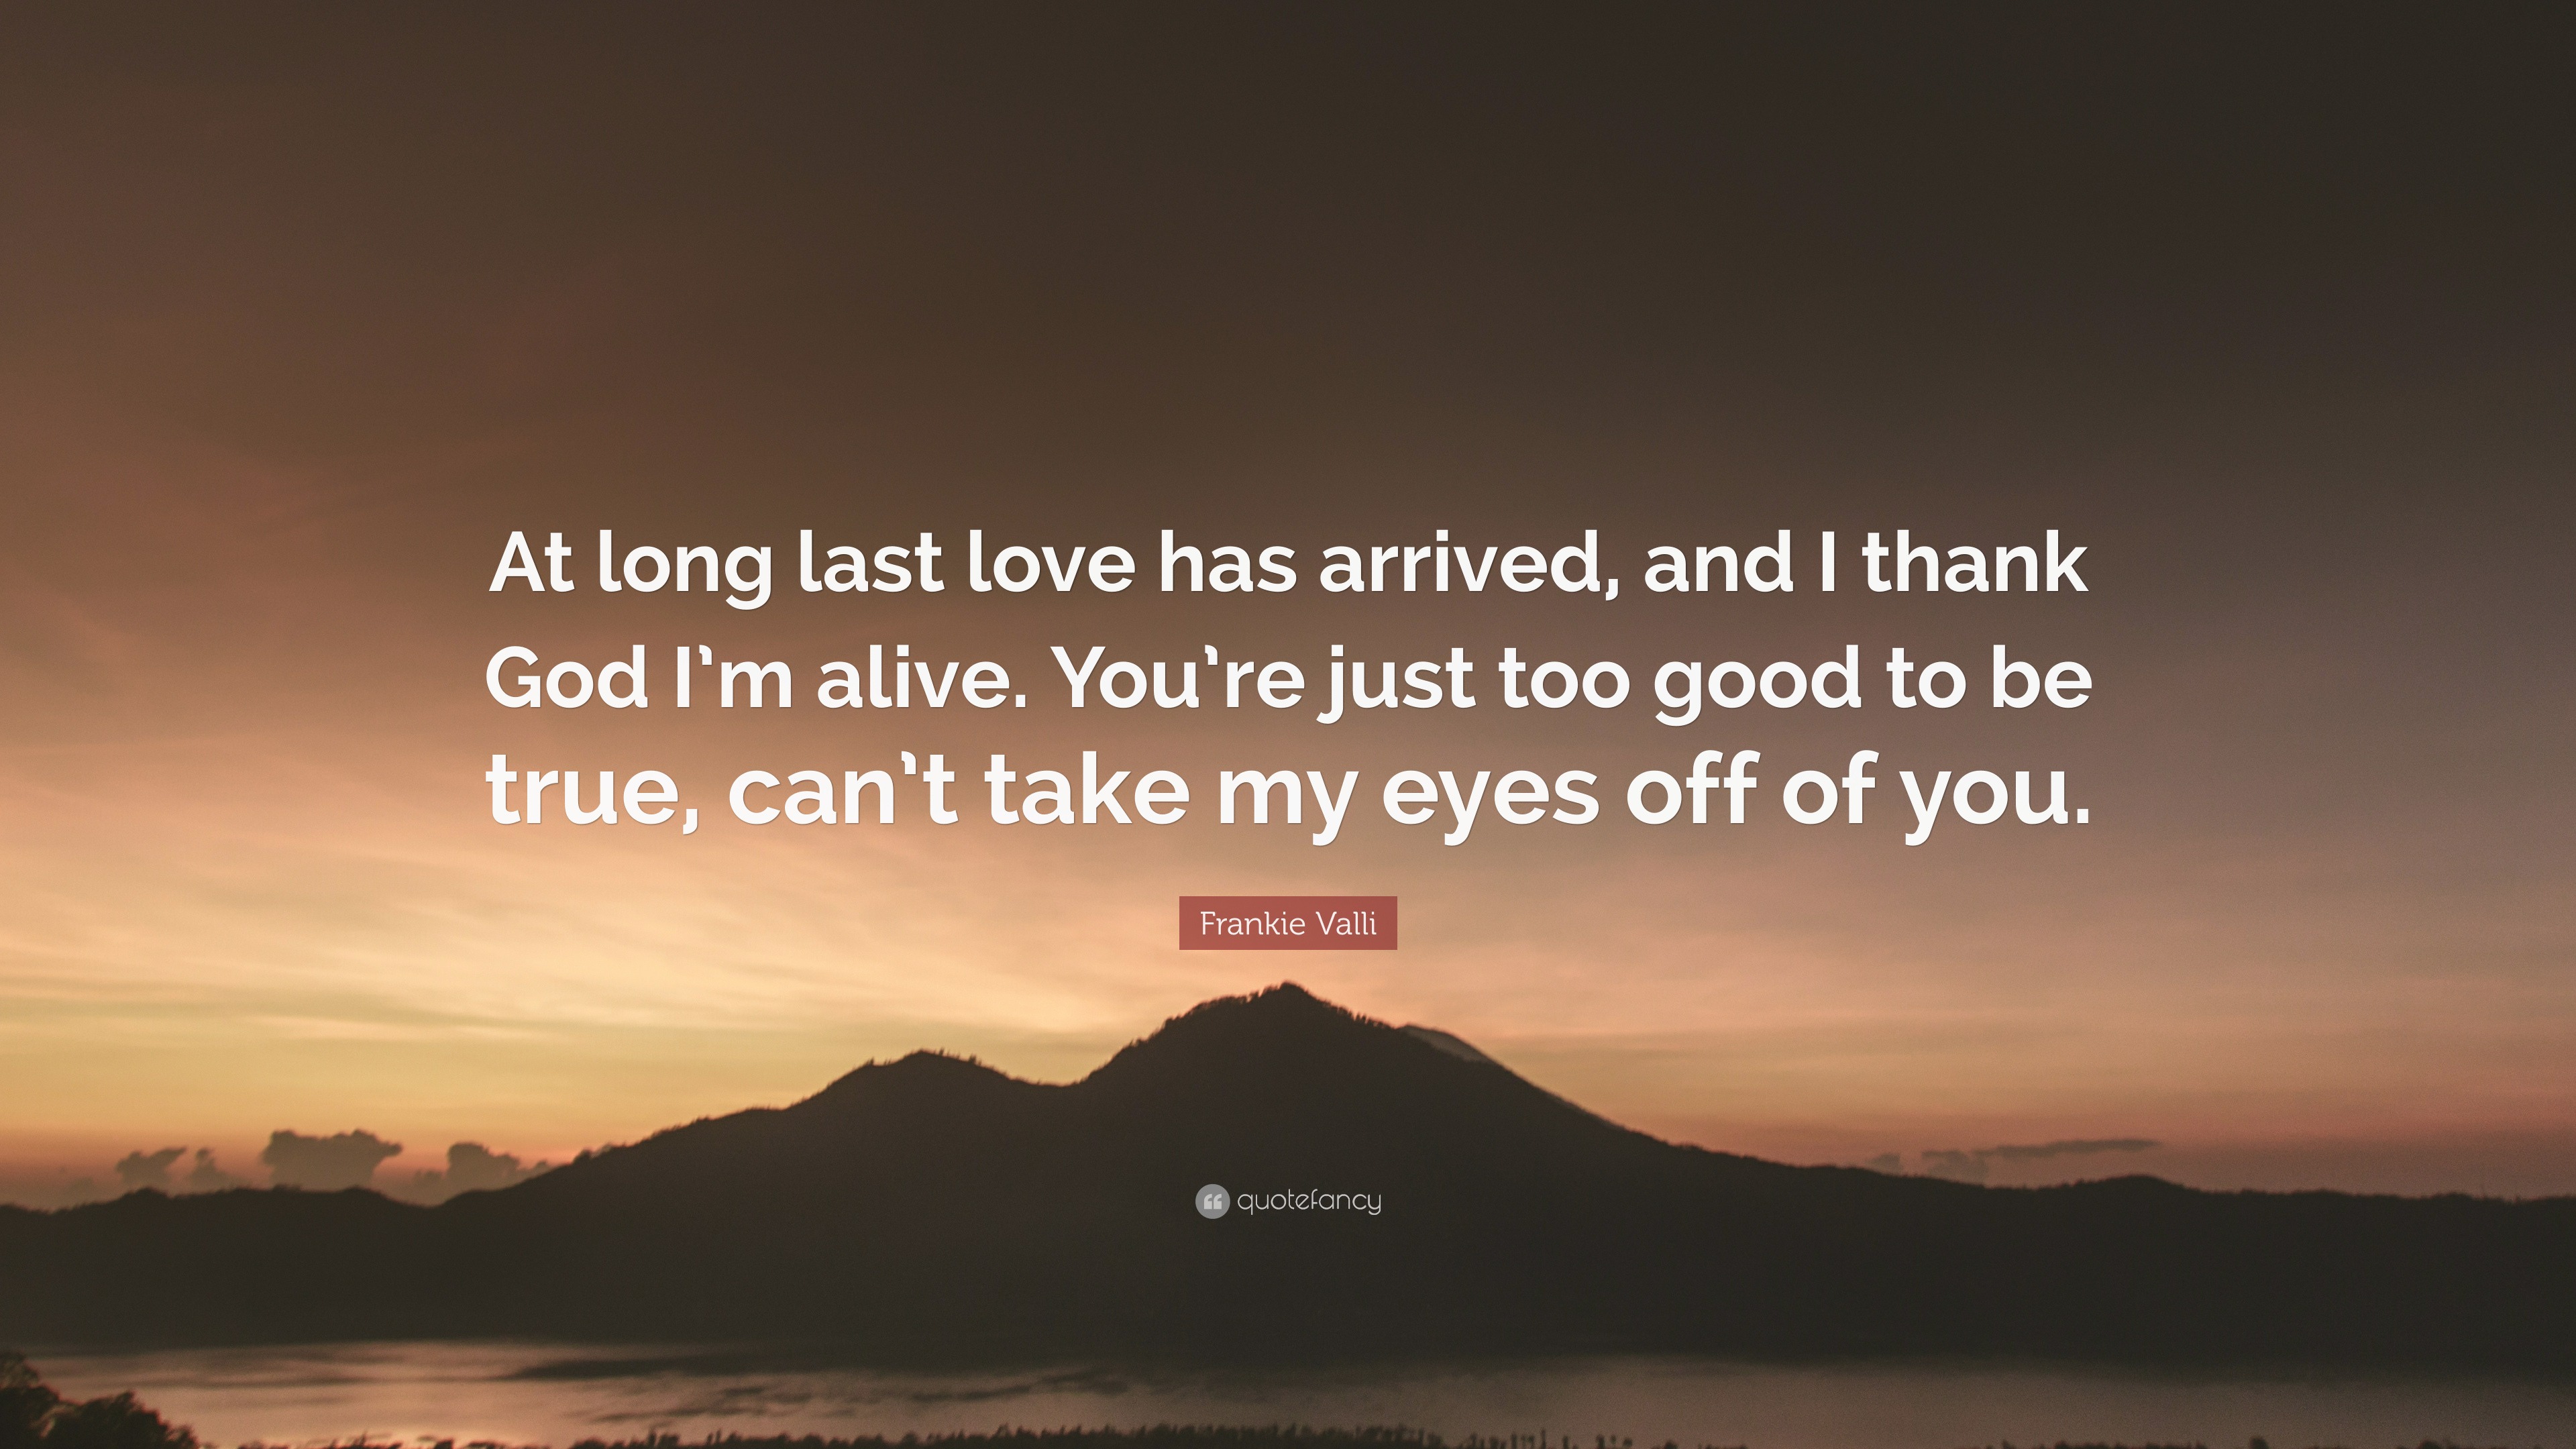 Frankie Valli Quote At Long Last Love Has Arrived And I Thank God I M Alive You Re Just Too Good To Be True Can T Take My Eyes Off Of You 9 Wallpapers